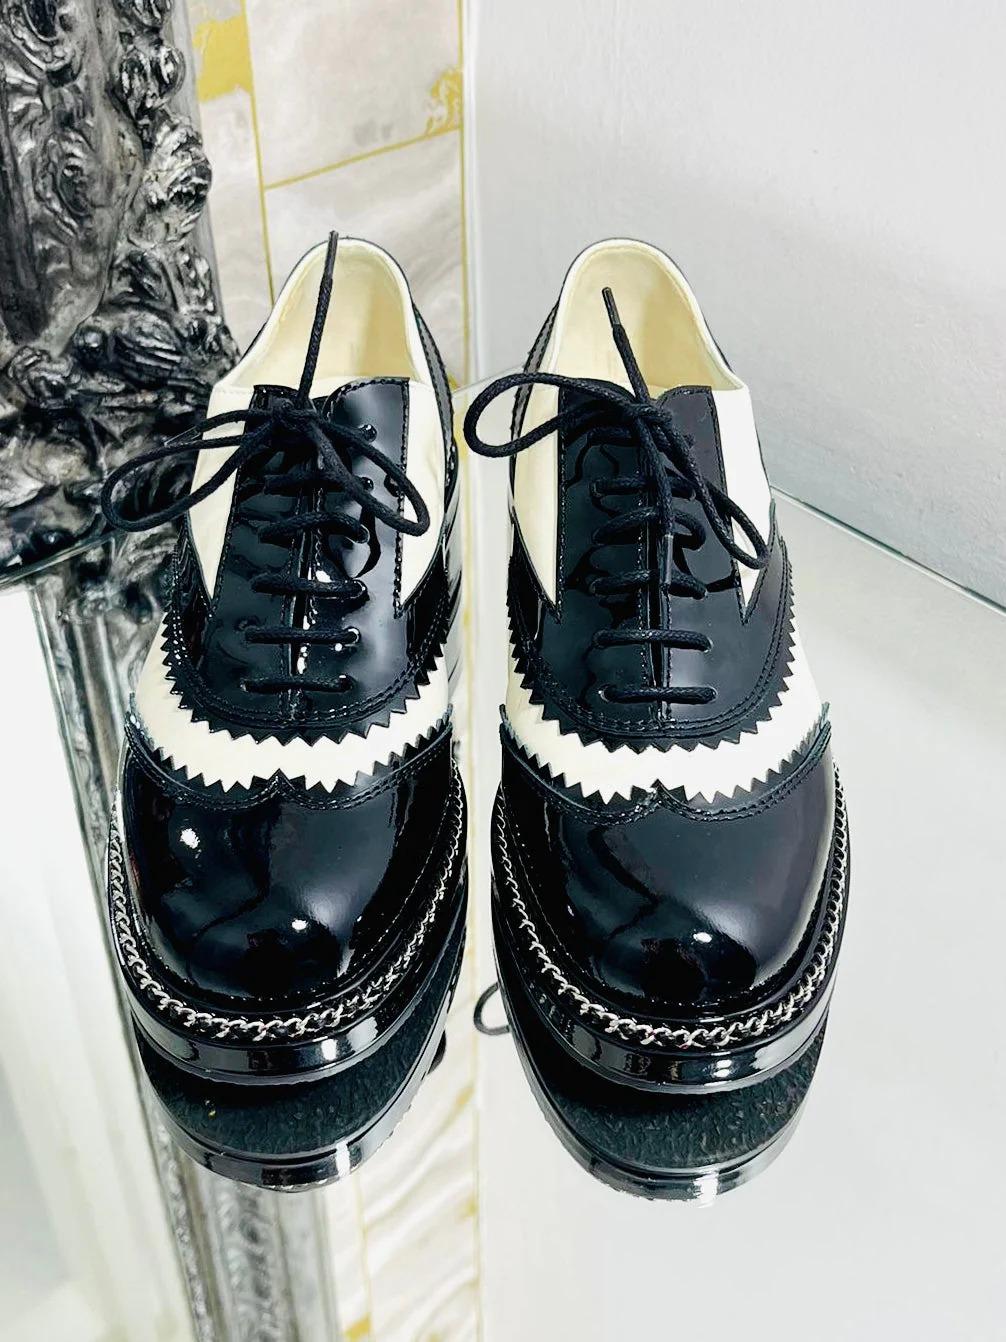 Chanel Leather, Chain & Logo Brogues

Black and ivory leather and patent leather with silver iconic chain trim. 'CHANEL' in silver metal to each heel. From 2019 Collection.

Additional information:
Size – 37.5
Composition – Leather
Condition –